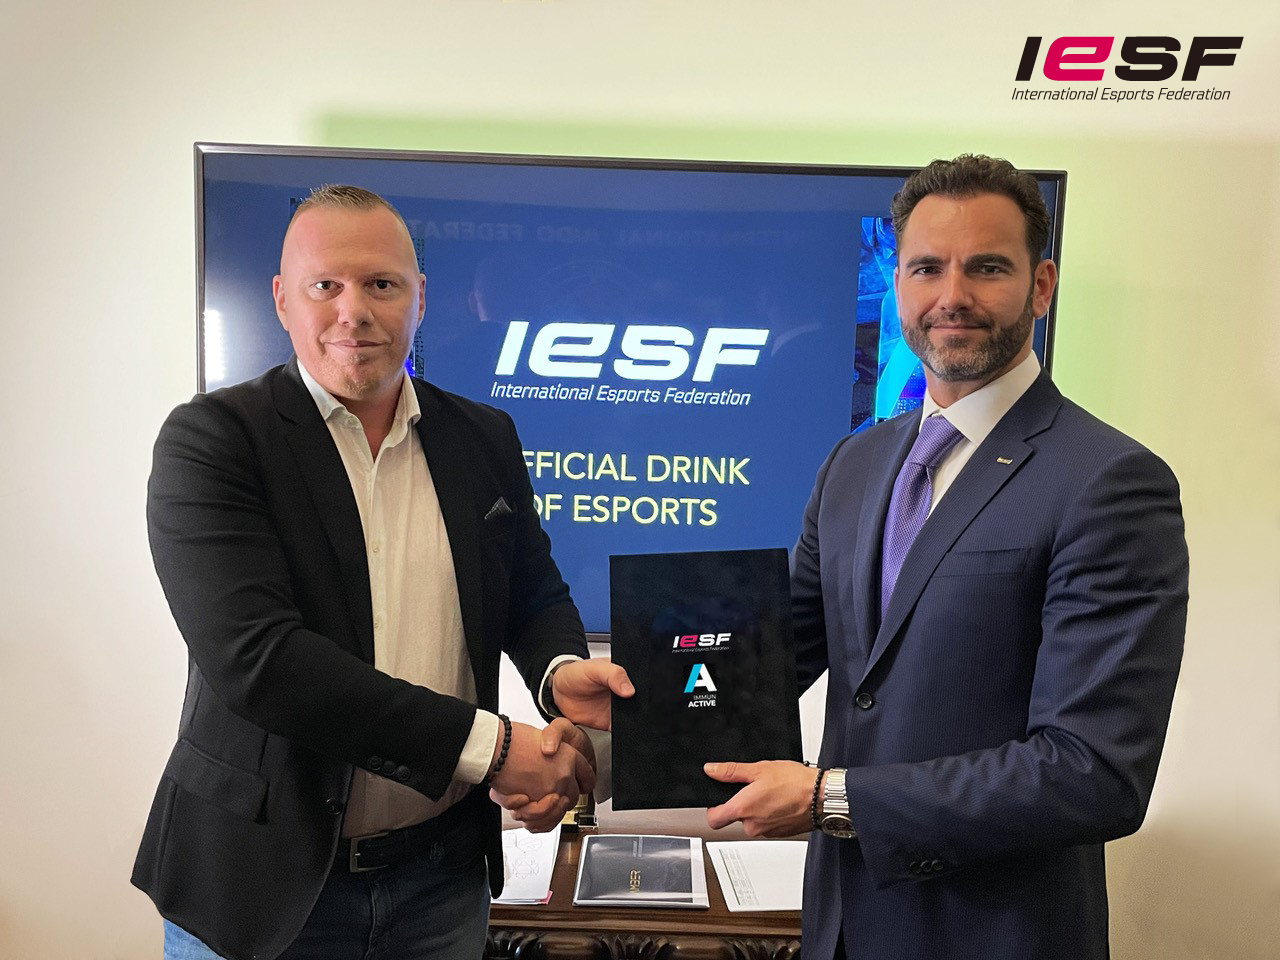 The IESF and Immun Active have partnered in the production of a vitamin drink specially tailored to the needs of esports athletes ©IESF